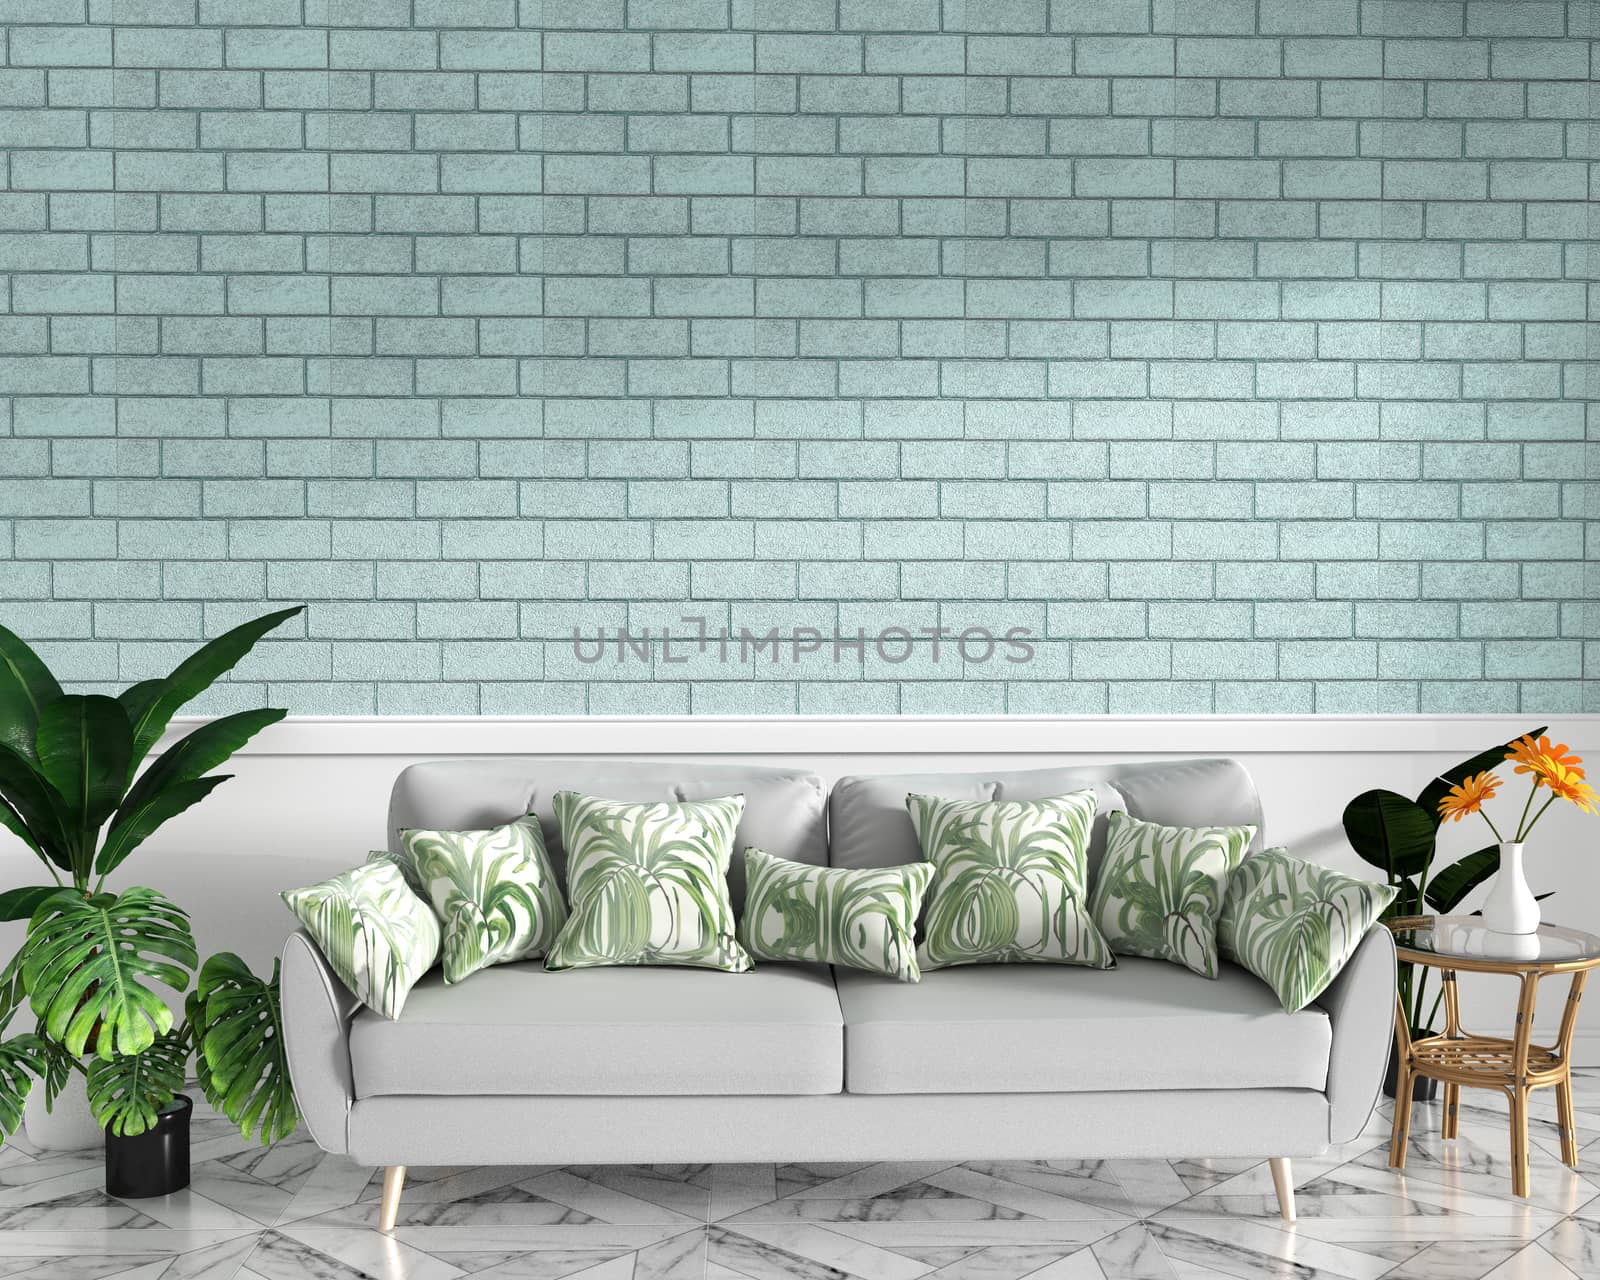 Tropical Loft interior mock up with sofa and decoration and mint brick wall on granite floor .3D rendering